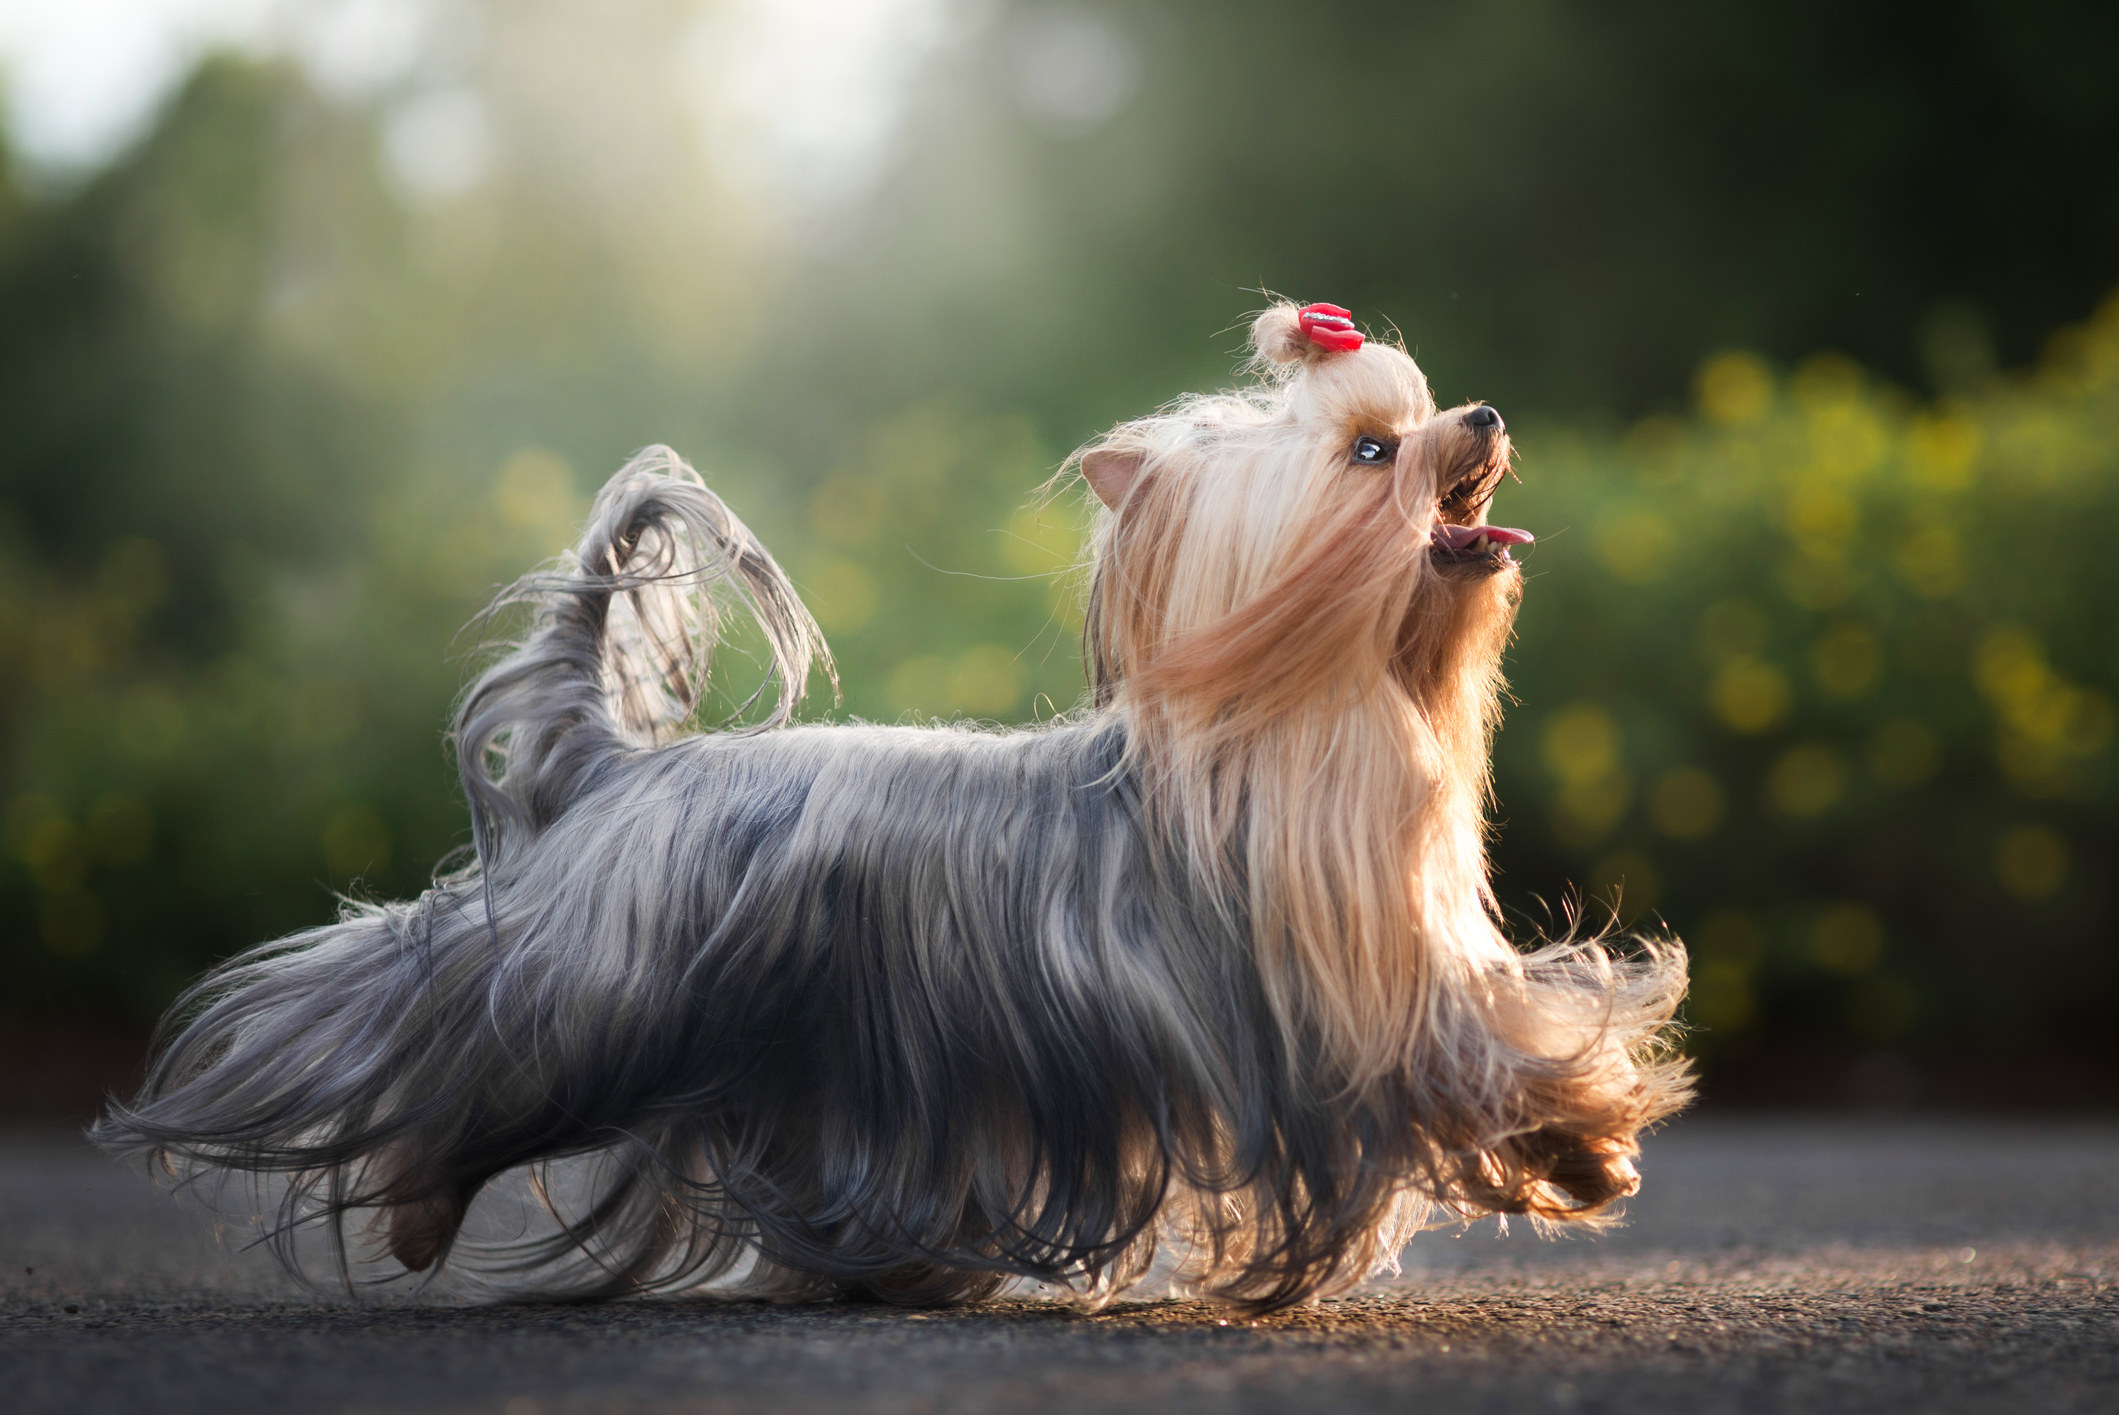 A long-haired Yorkshire Terrier strutting